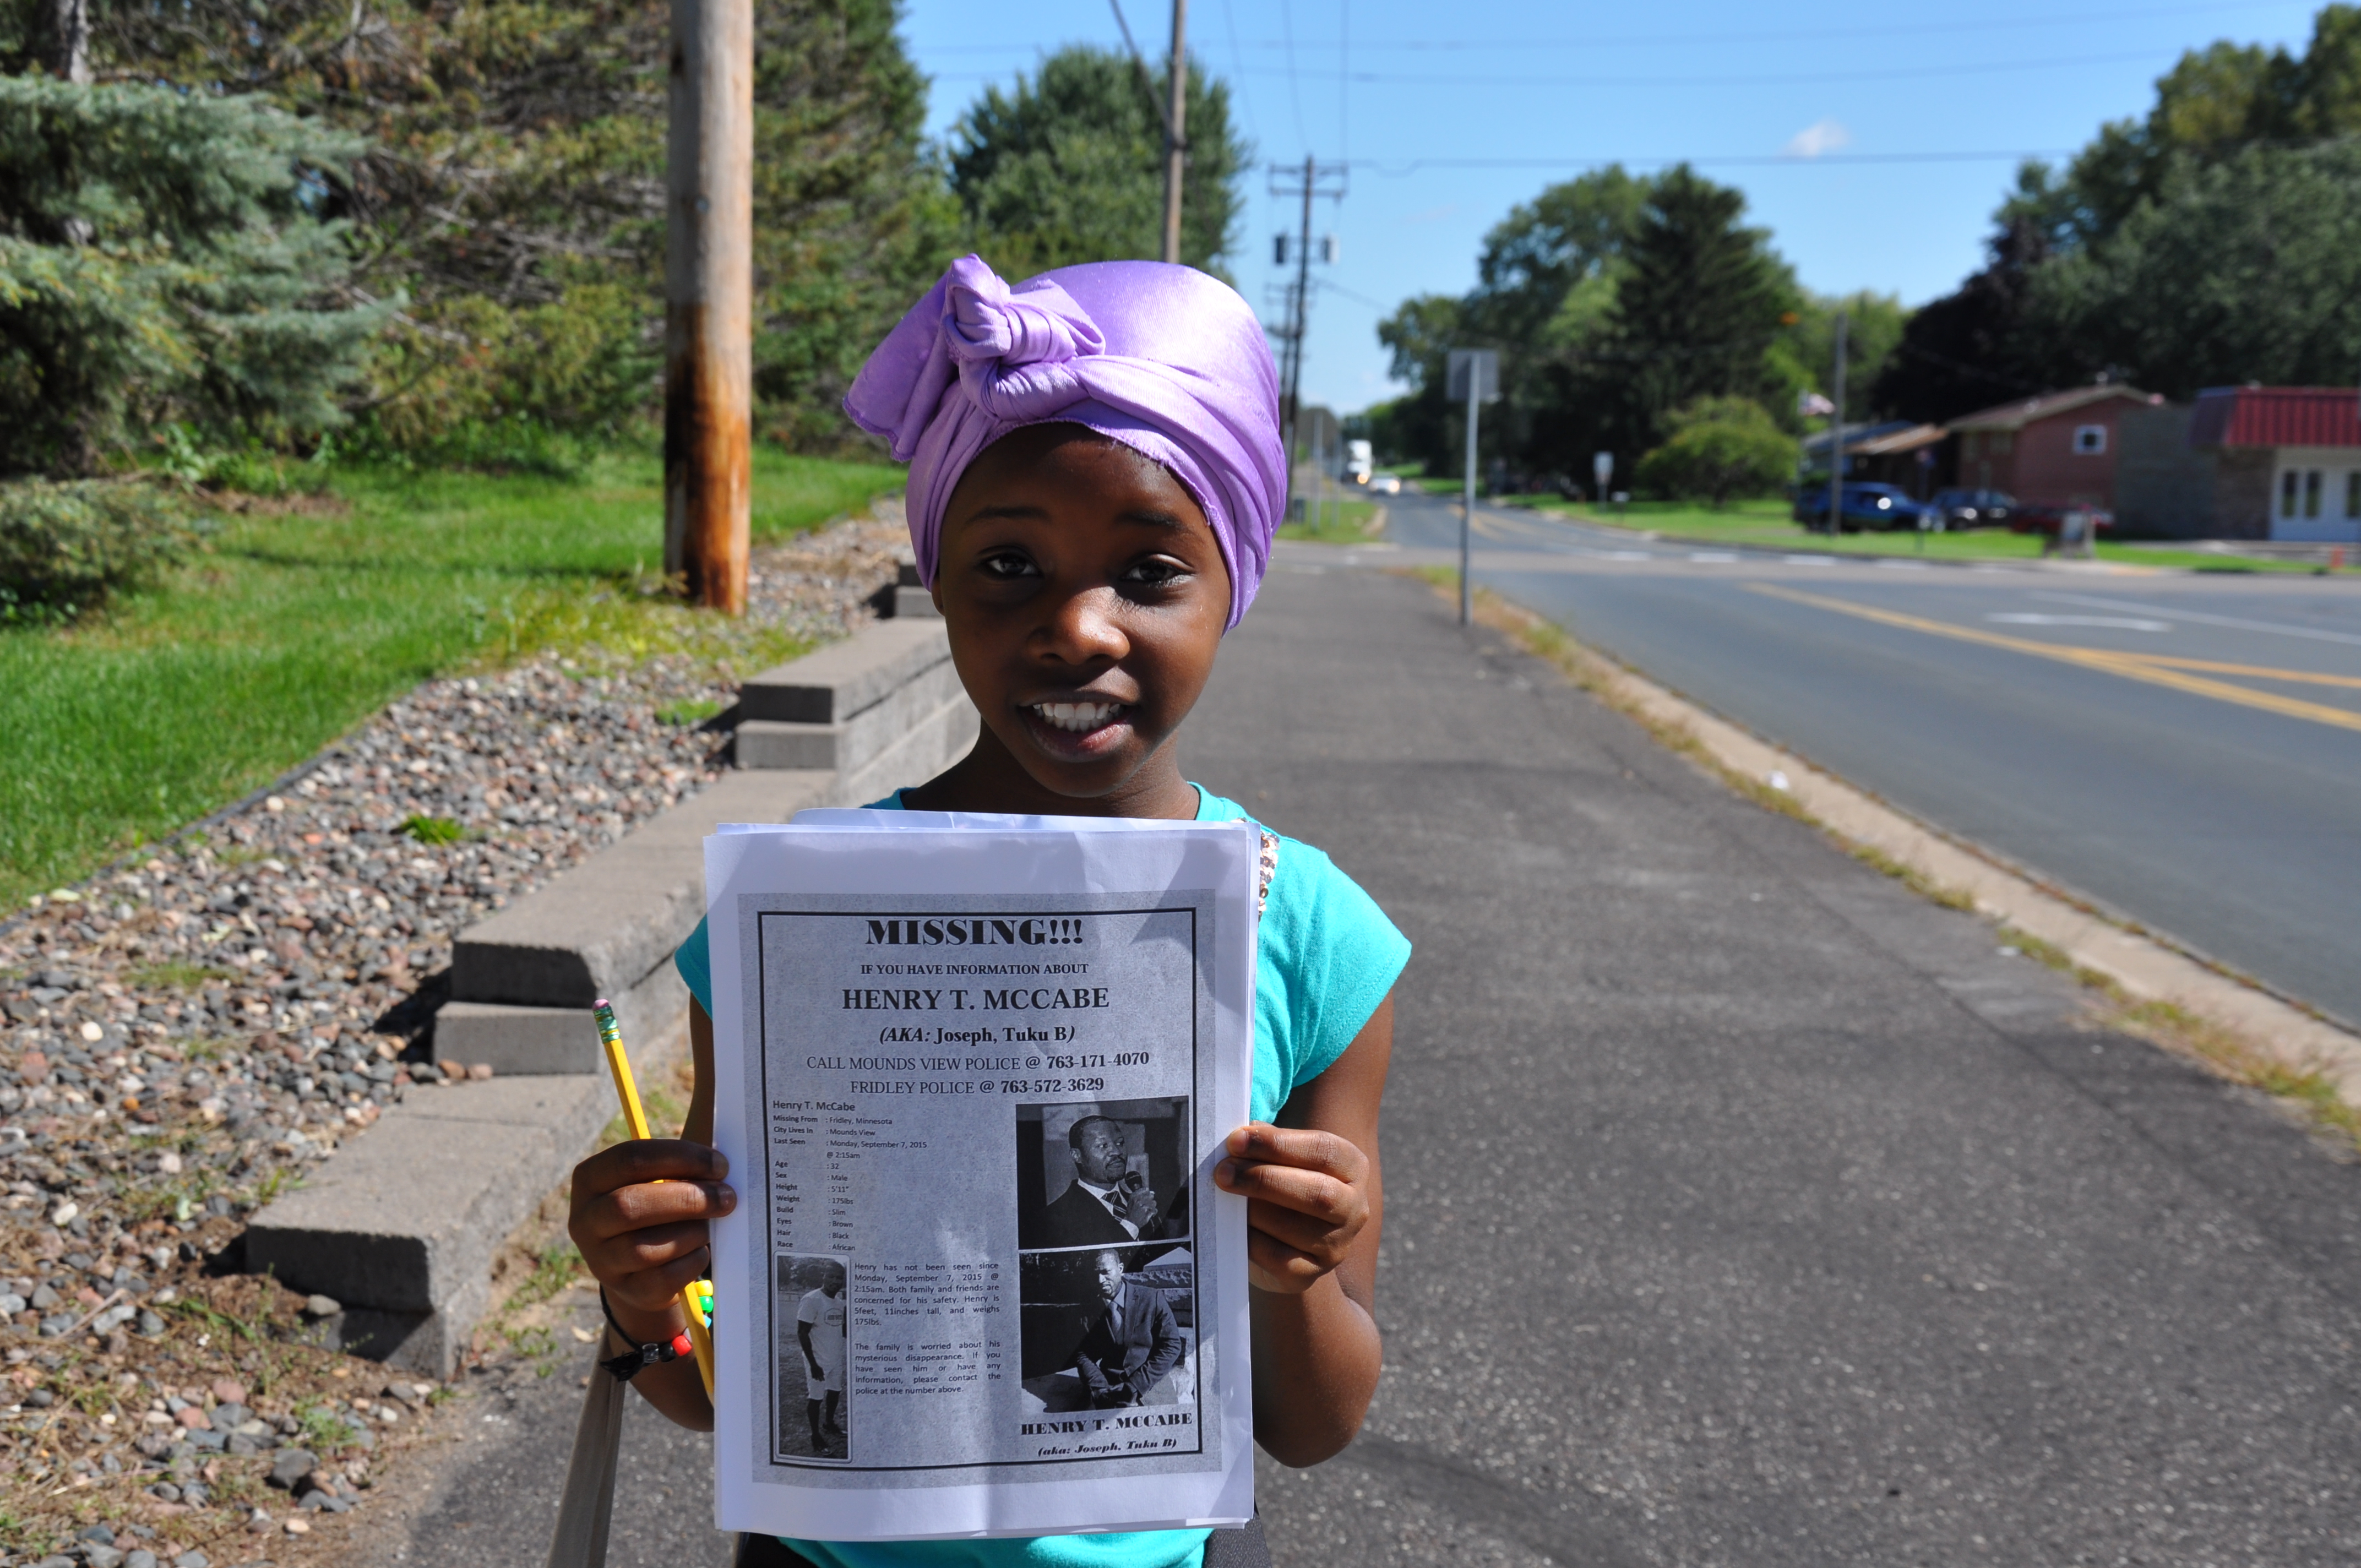 A girl holding up a newspaper on the side of the road.